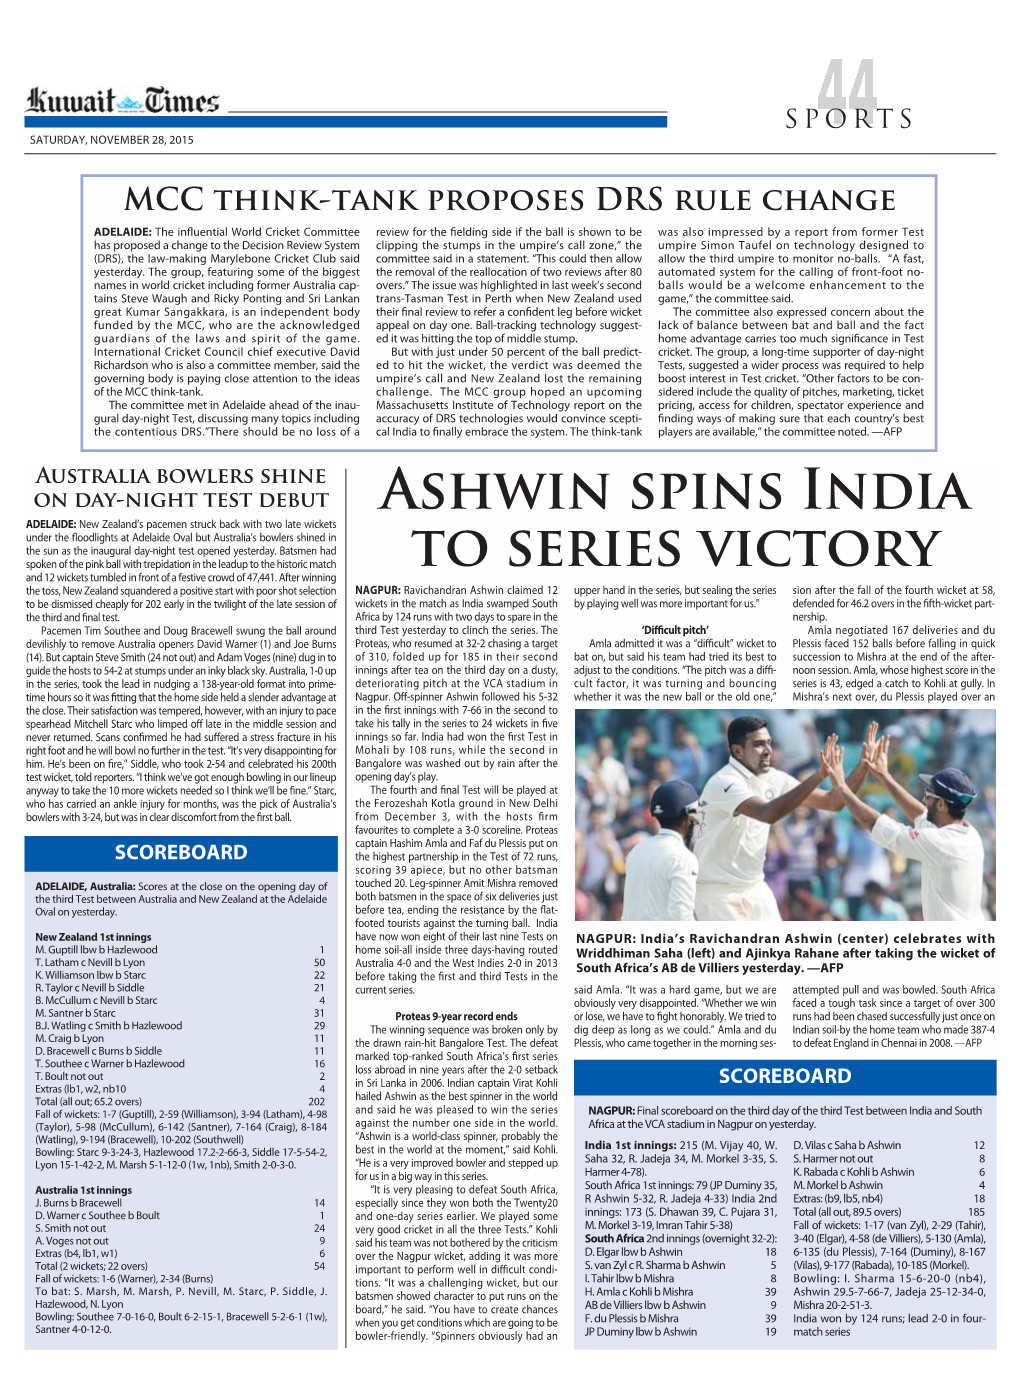 Ashwin Spins India to Series Victory